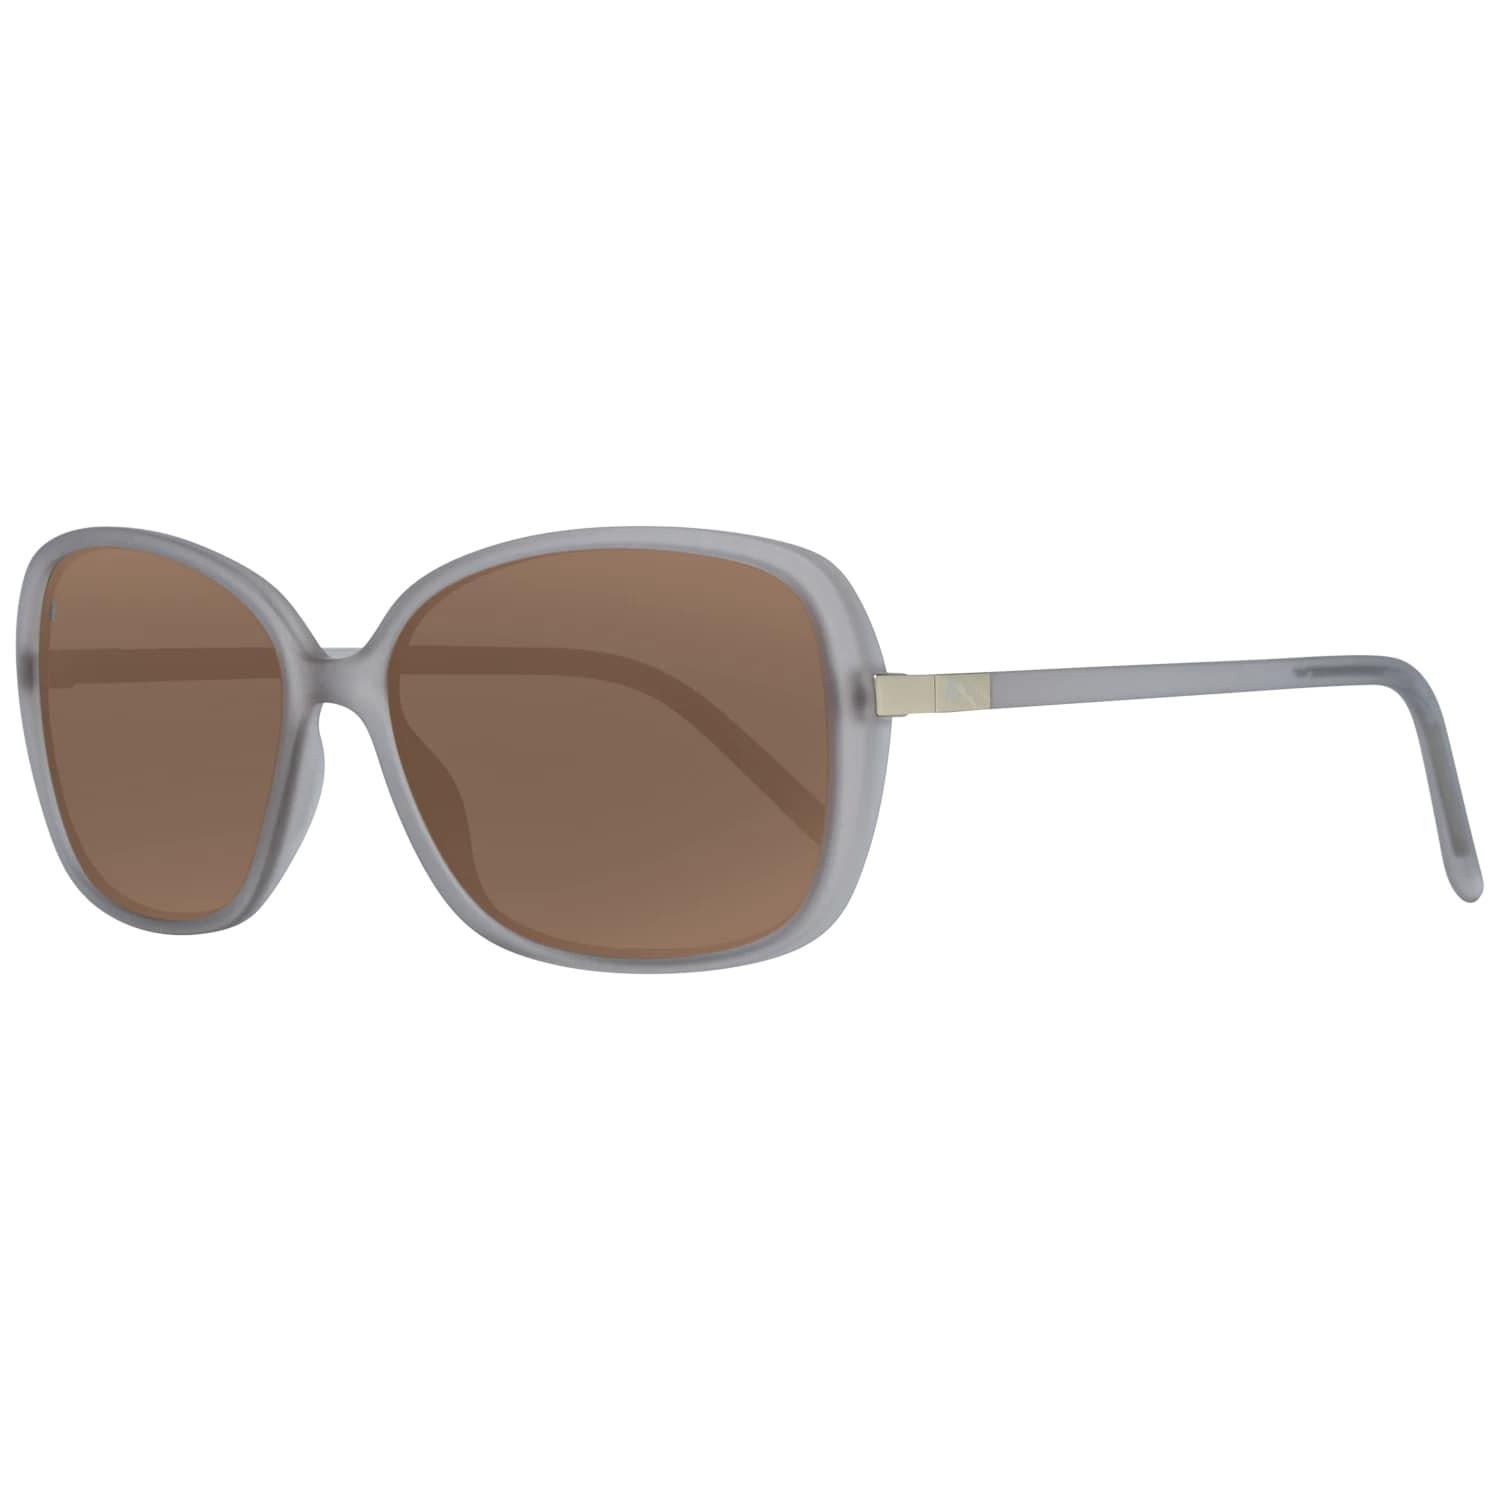 Details
MATERIAL: Acetate
COLOR: Brown
MODEL: R3292-B-5715-140-V549-E42
GENDER: Women
COUNTRY OF MANUFACTURE: China
TYPE: Sunglasses
ORIGINAL CASE?: Yes
STYLE: Oval
OCCASION: Casual
FEATURES: Lightweight
LENS COLOR: Brown
LENS TECHNOLOGY: No